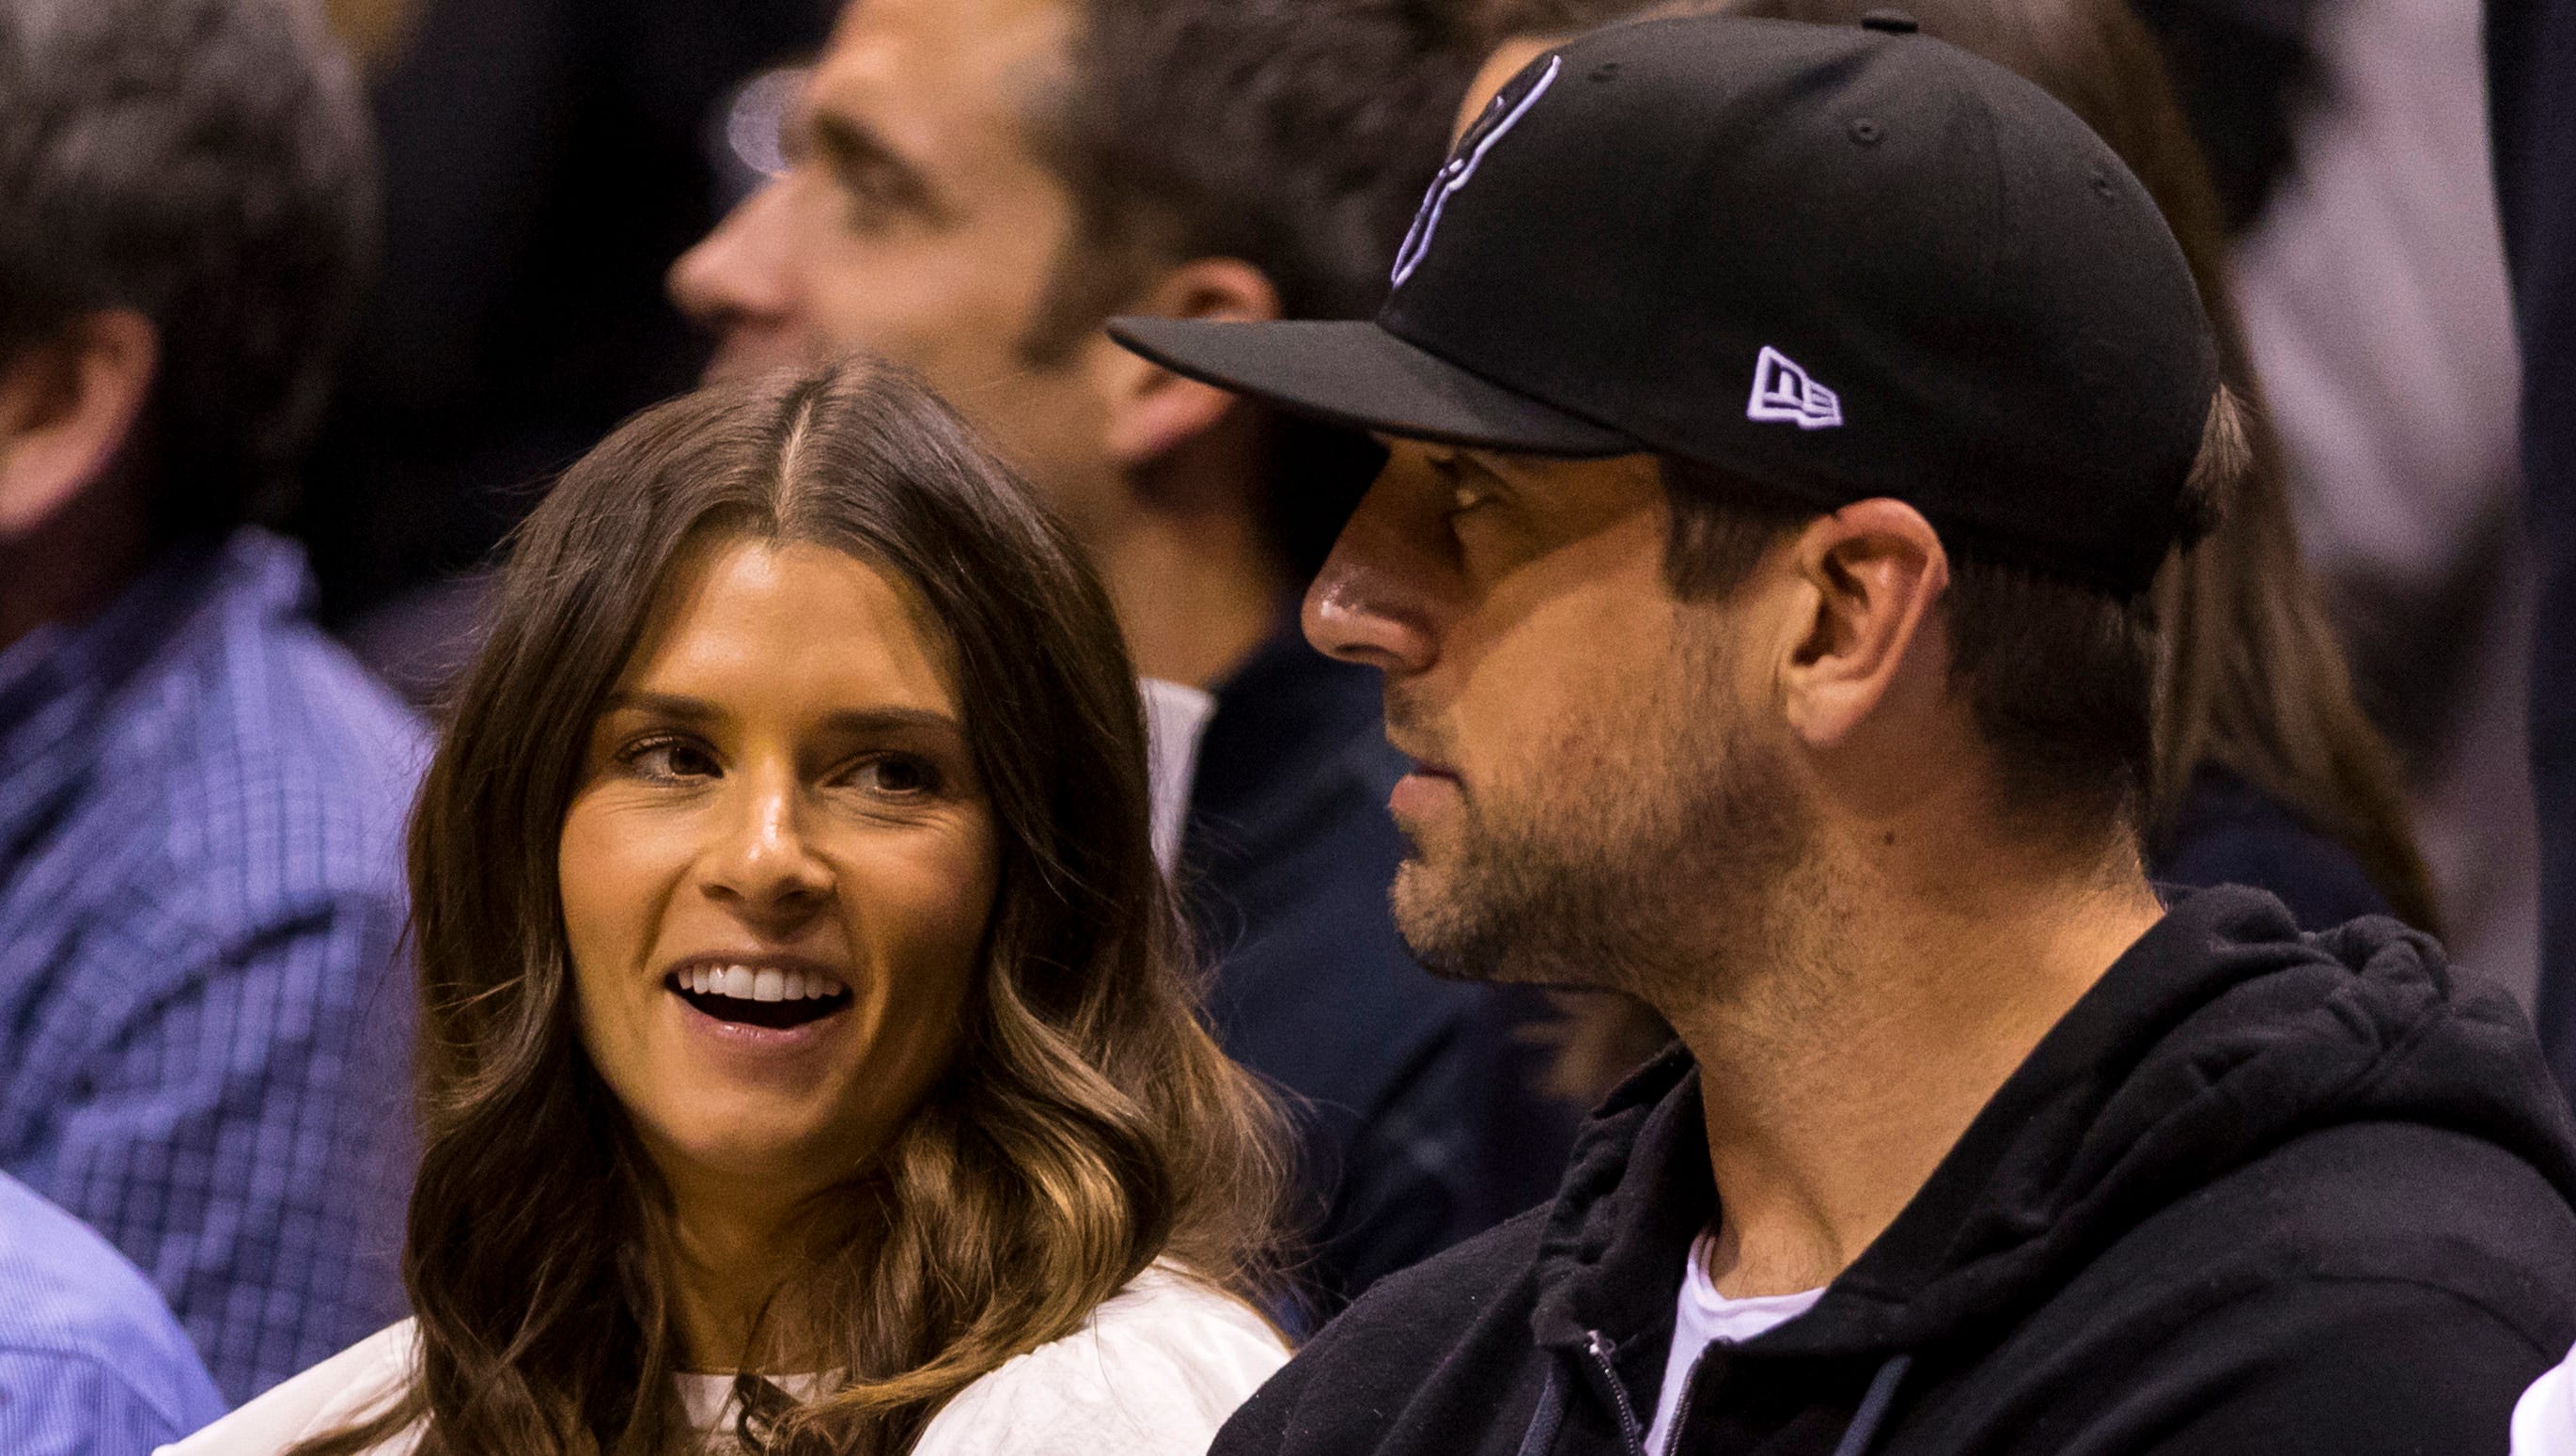 Danica Patrick and Aaron Rodgers look on during the first quarter of Game 3 between the Boston Celtics and Milwaukee Bucks.